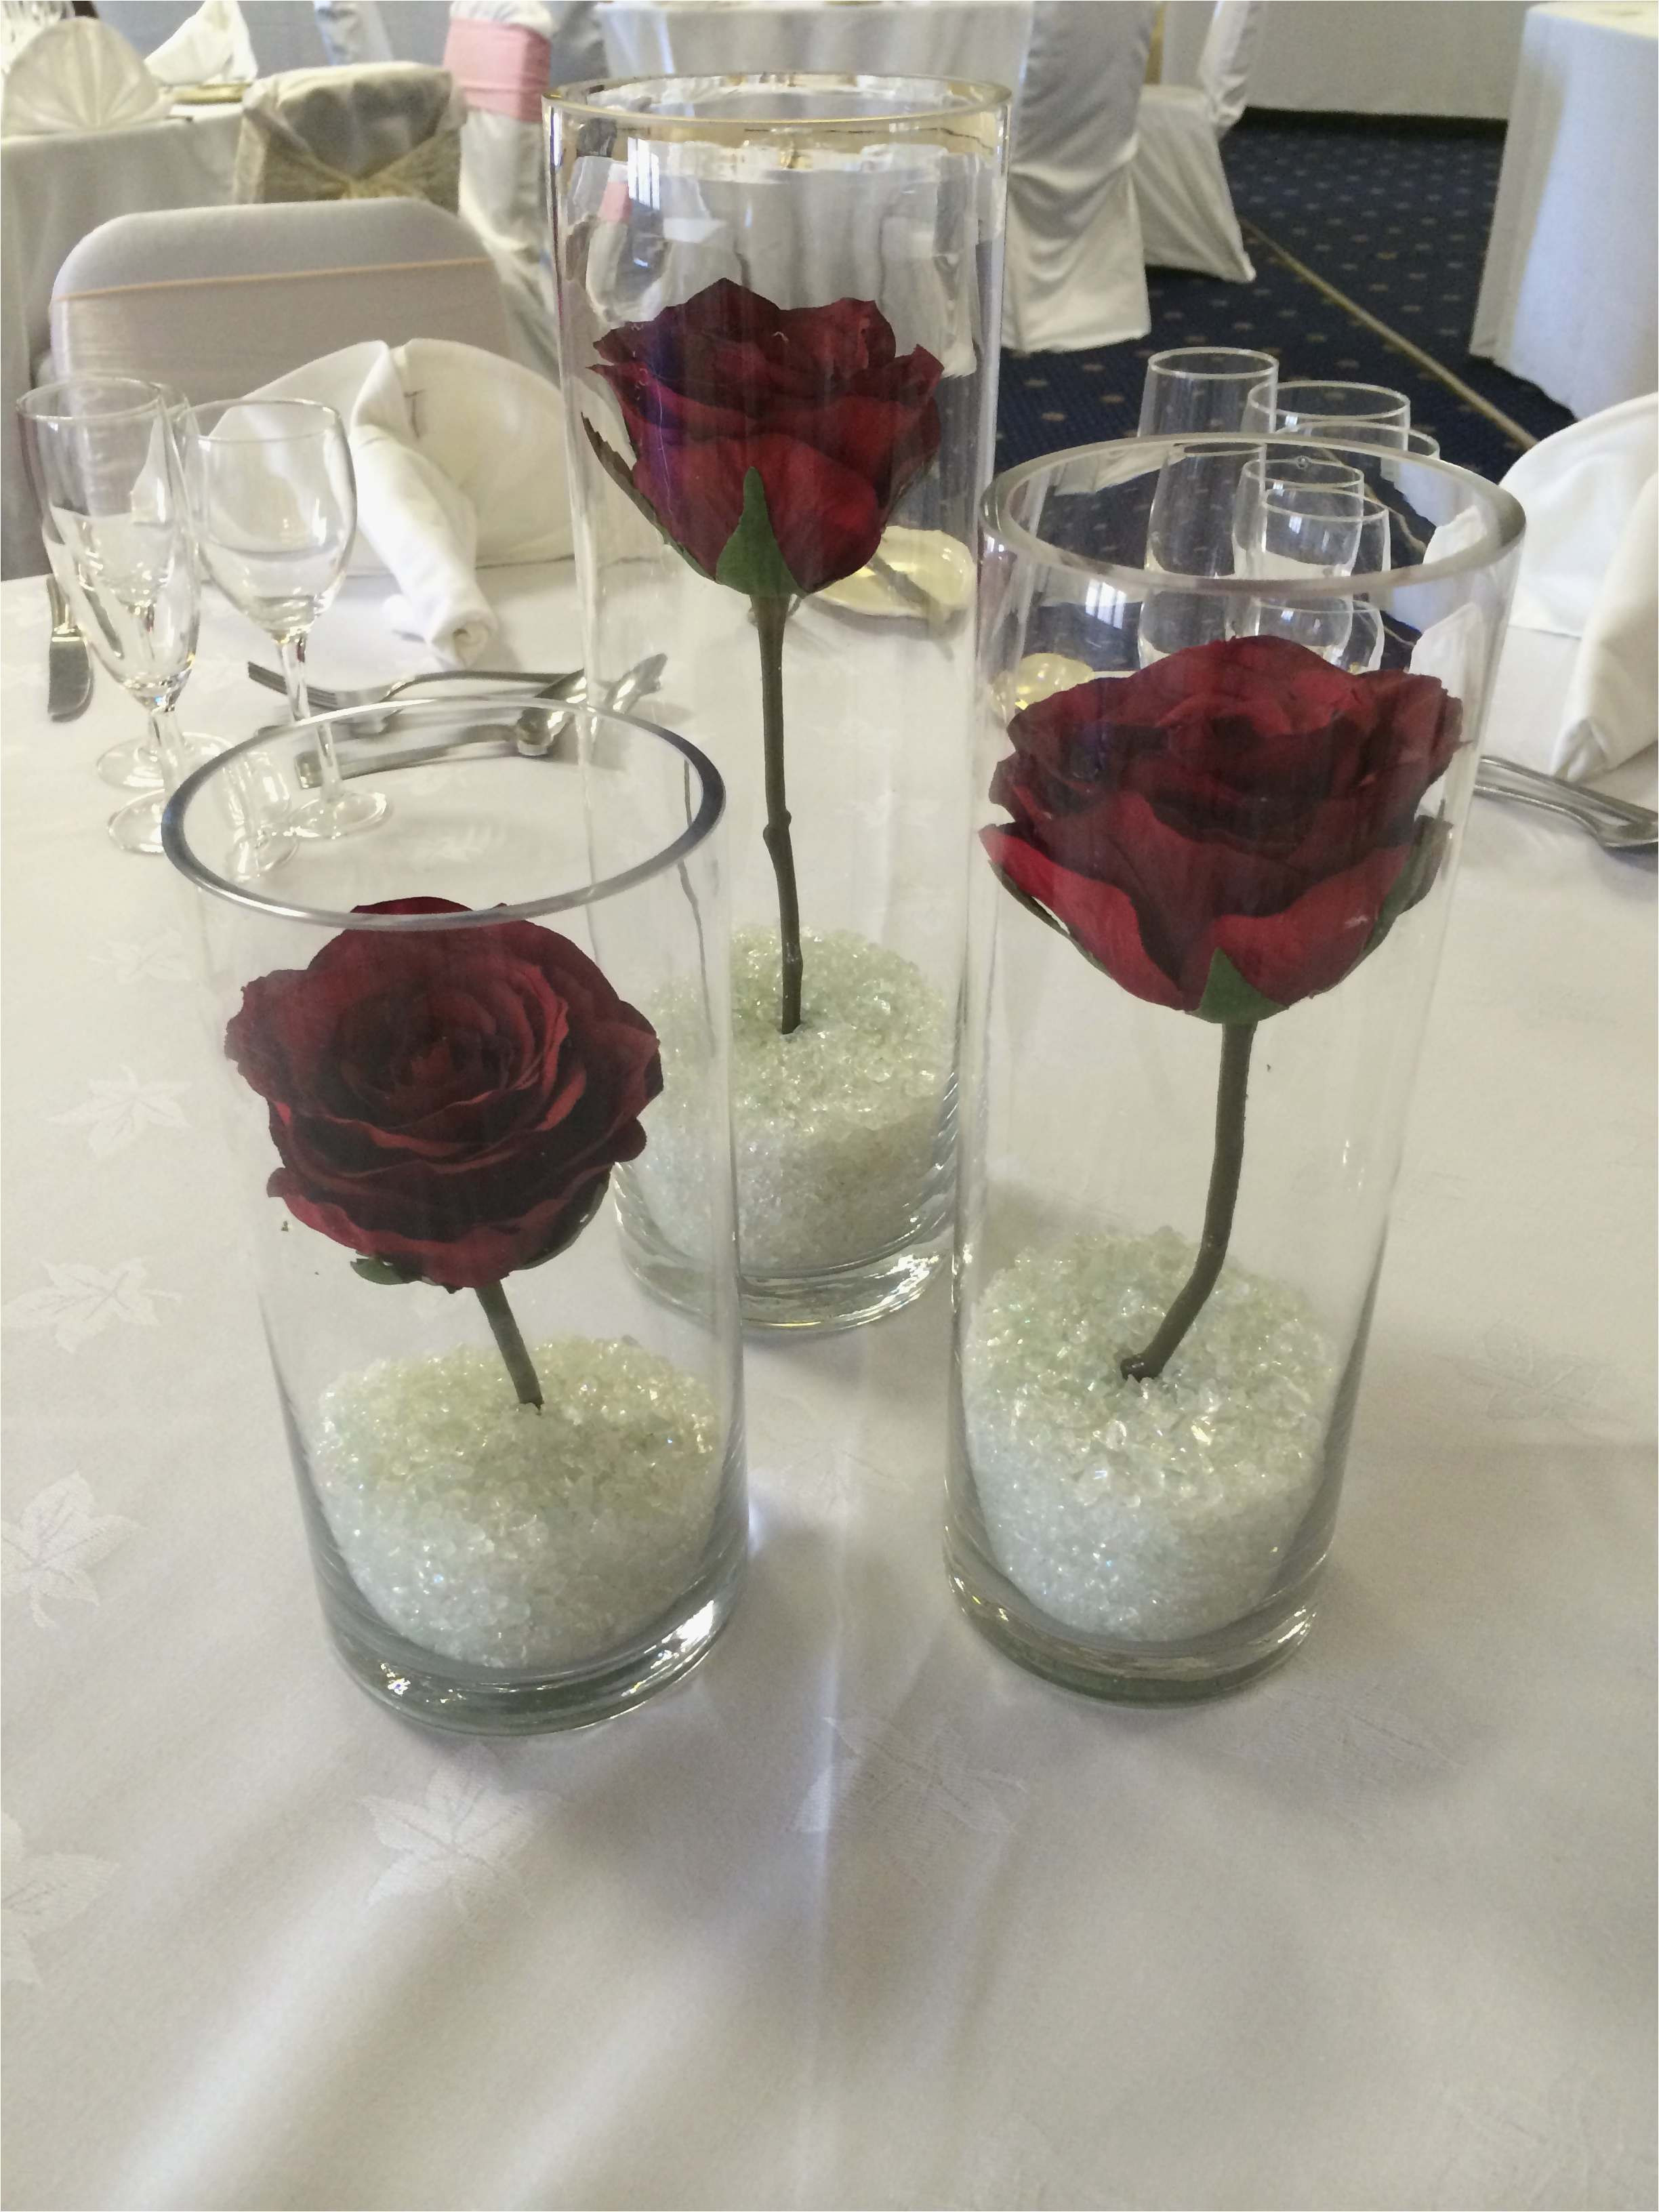 10 Stylish Cut Glass Flower Vase 2024 free download cut glass flower vase of wedding flower centerpieces style 30 awesome vintage glass vases for with regard to wedding flower centerpieces awesome charming table vase decorations 20 tall cente